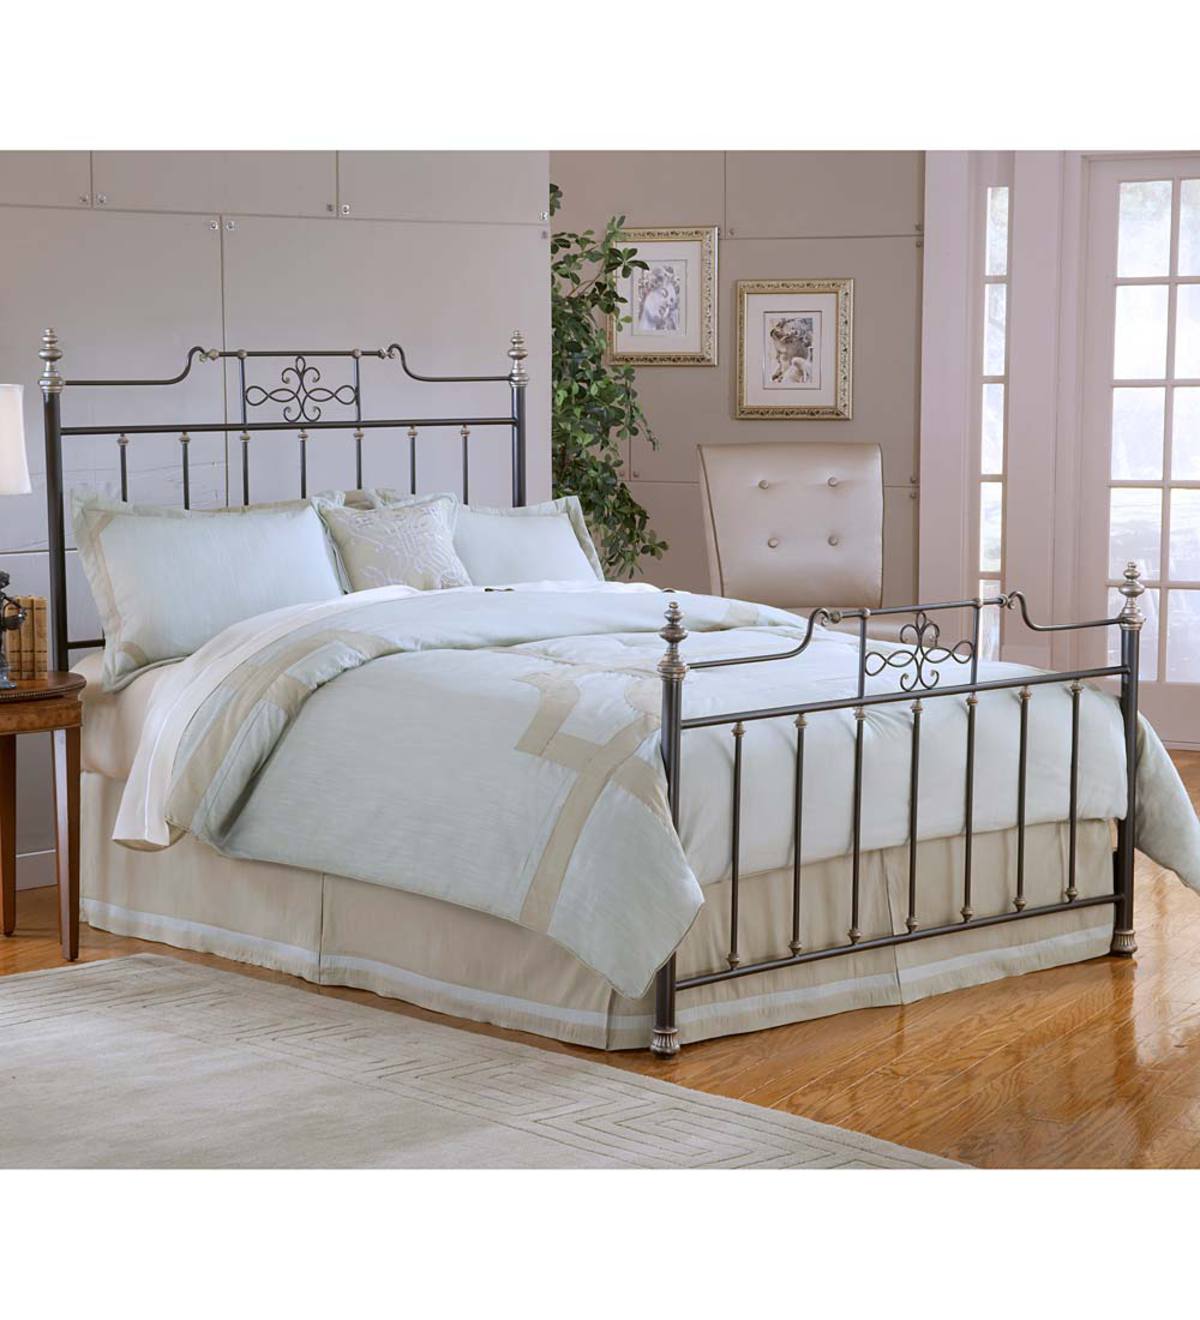 Abigale Metal Bed Frame and Headboard